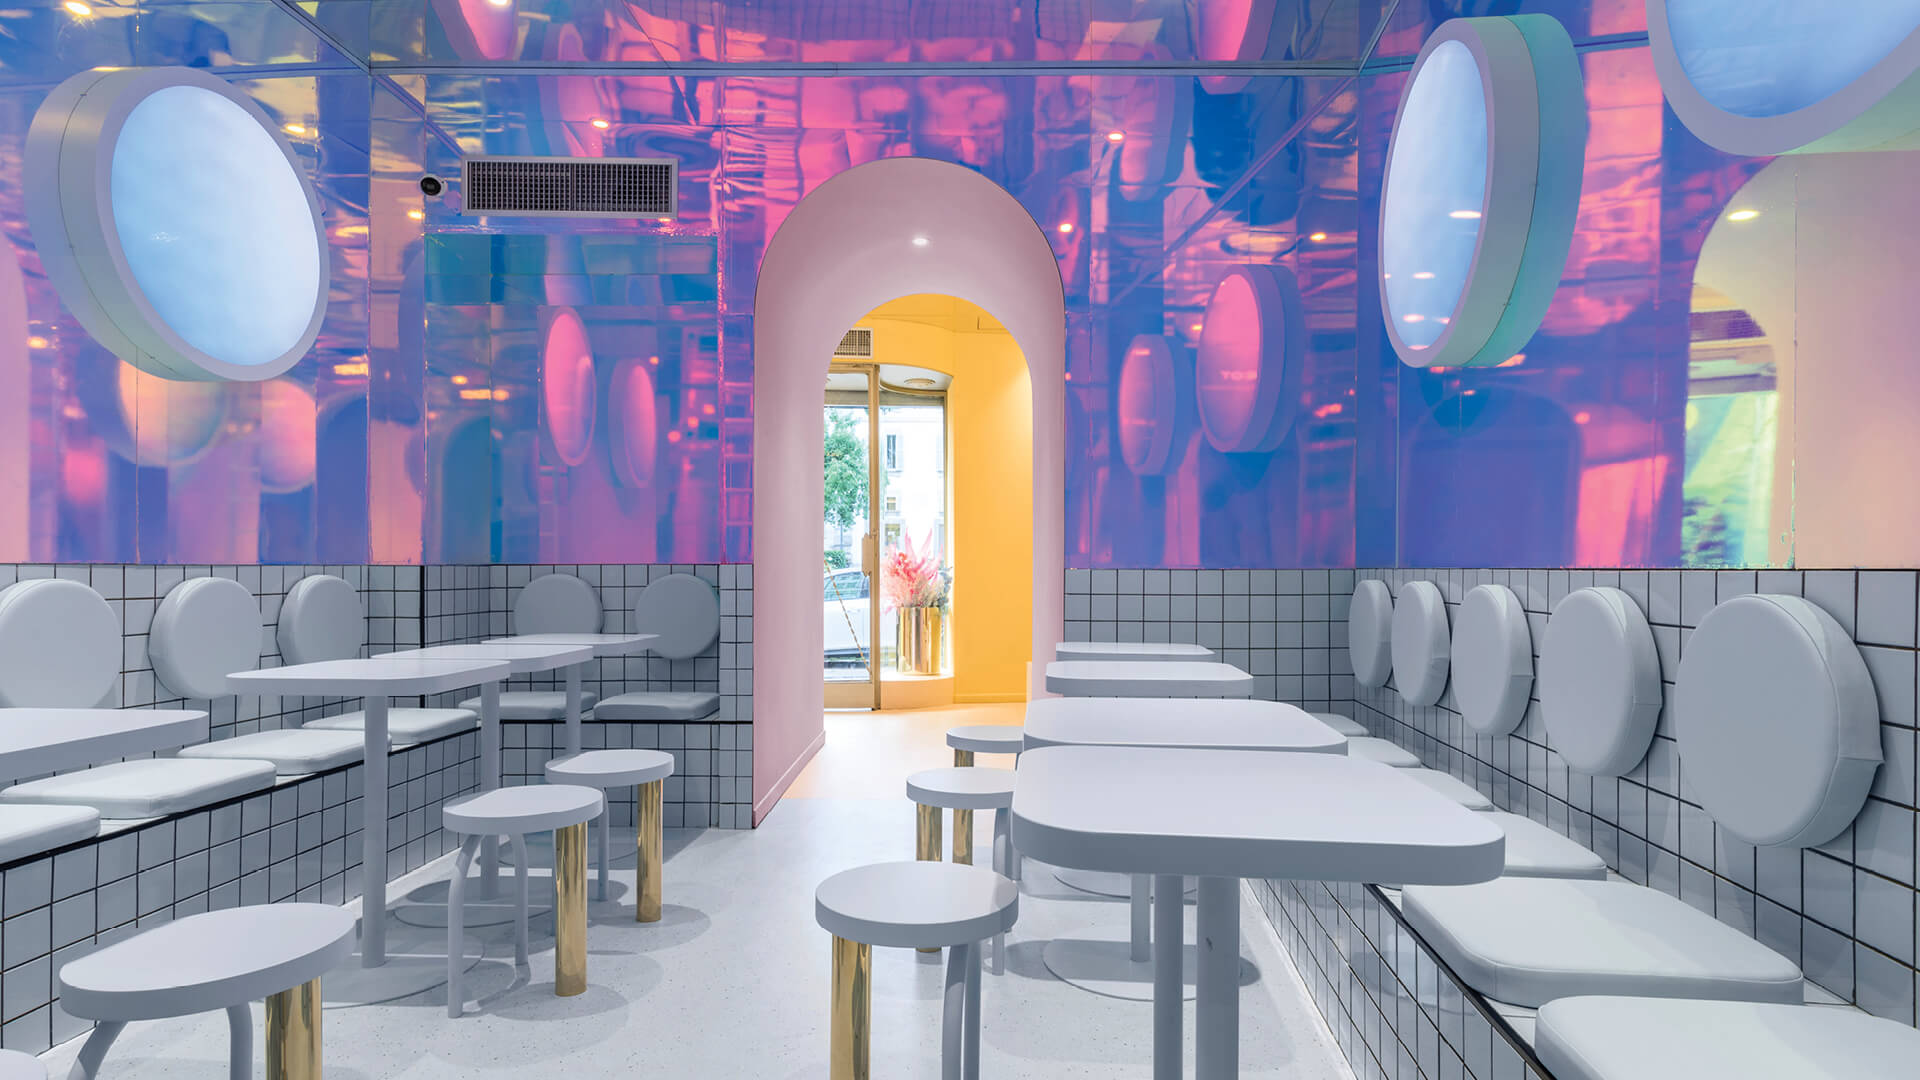 Masquespacio's interior design of a burger joint nods to fast food chains of the 80s